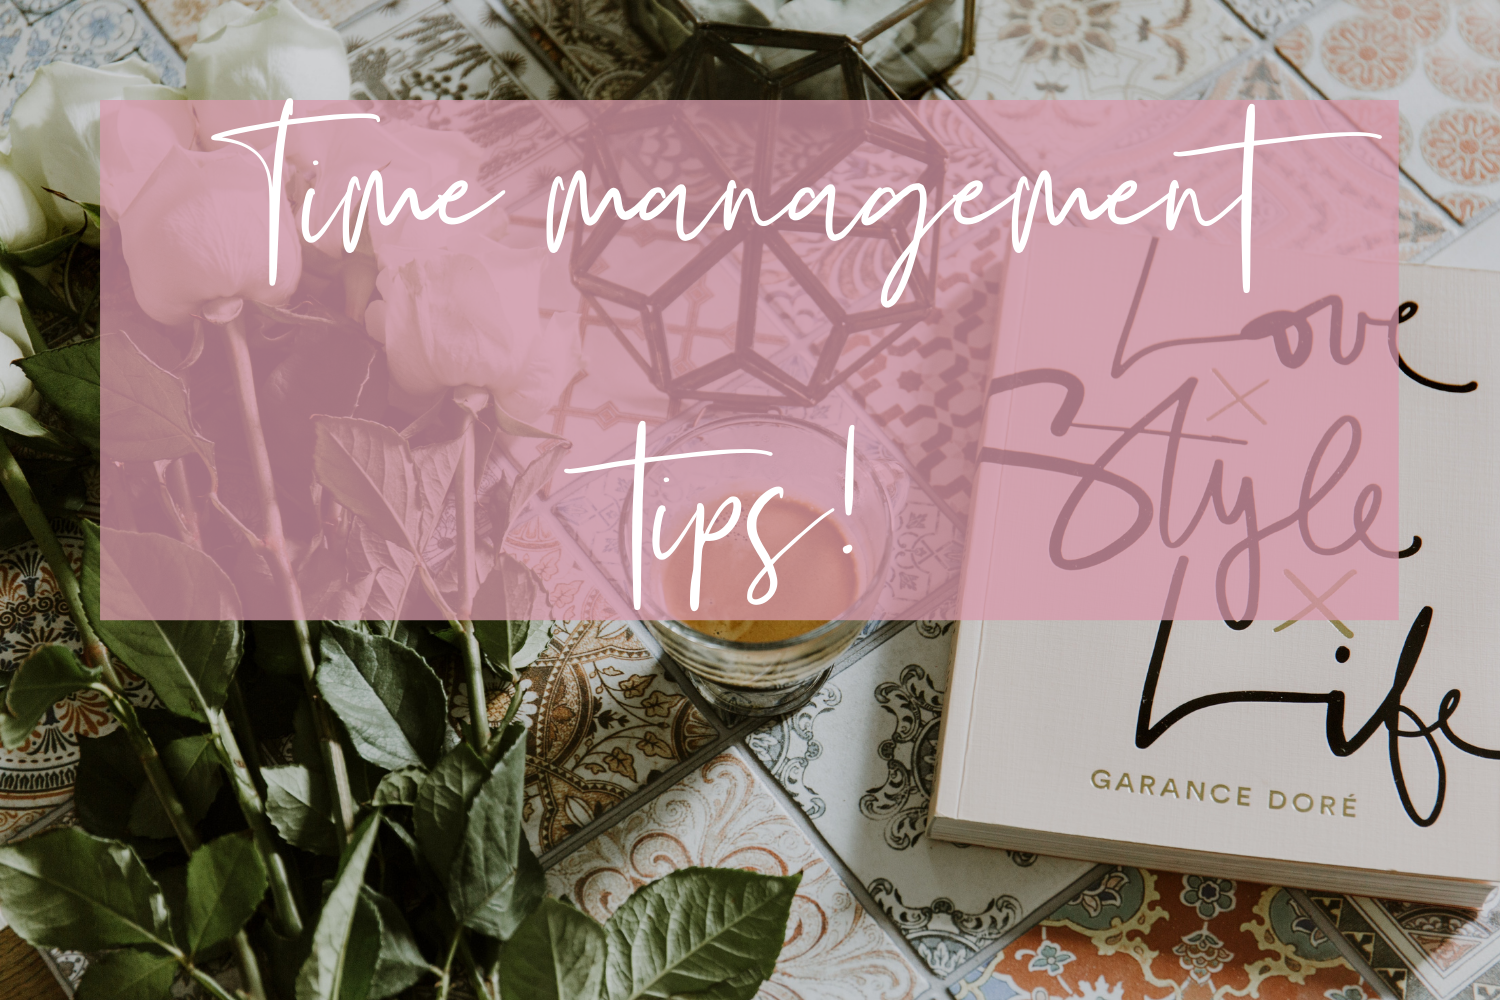 Time Management Tips! Increasing Productivity & Decreasing Anxiety